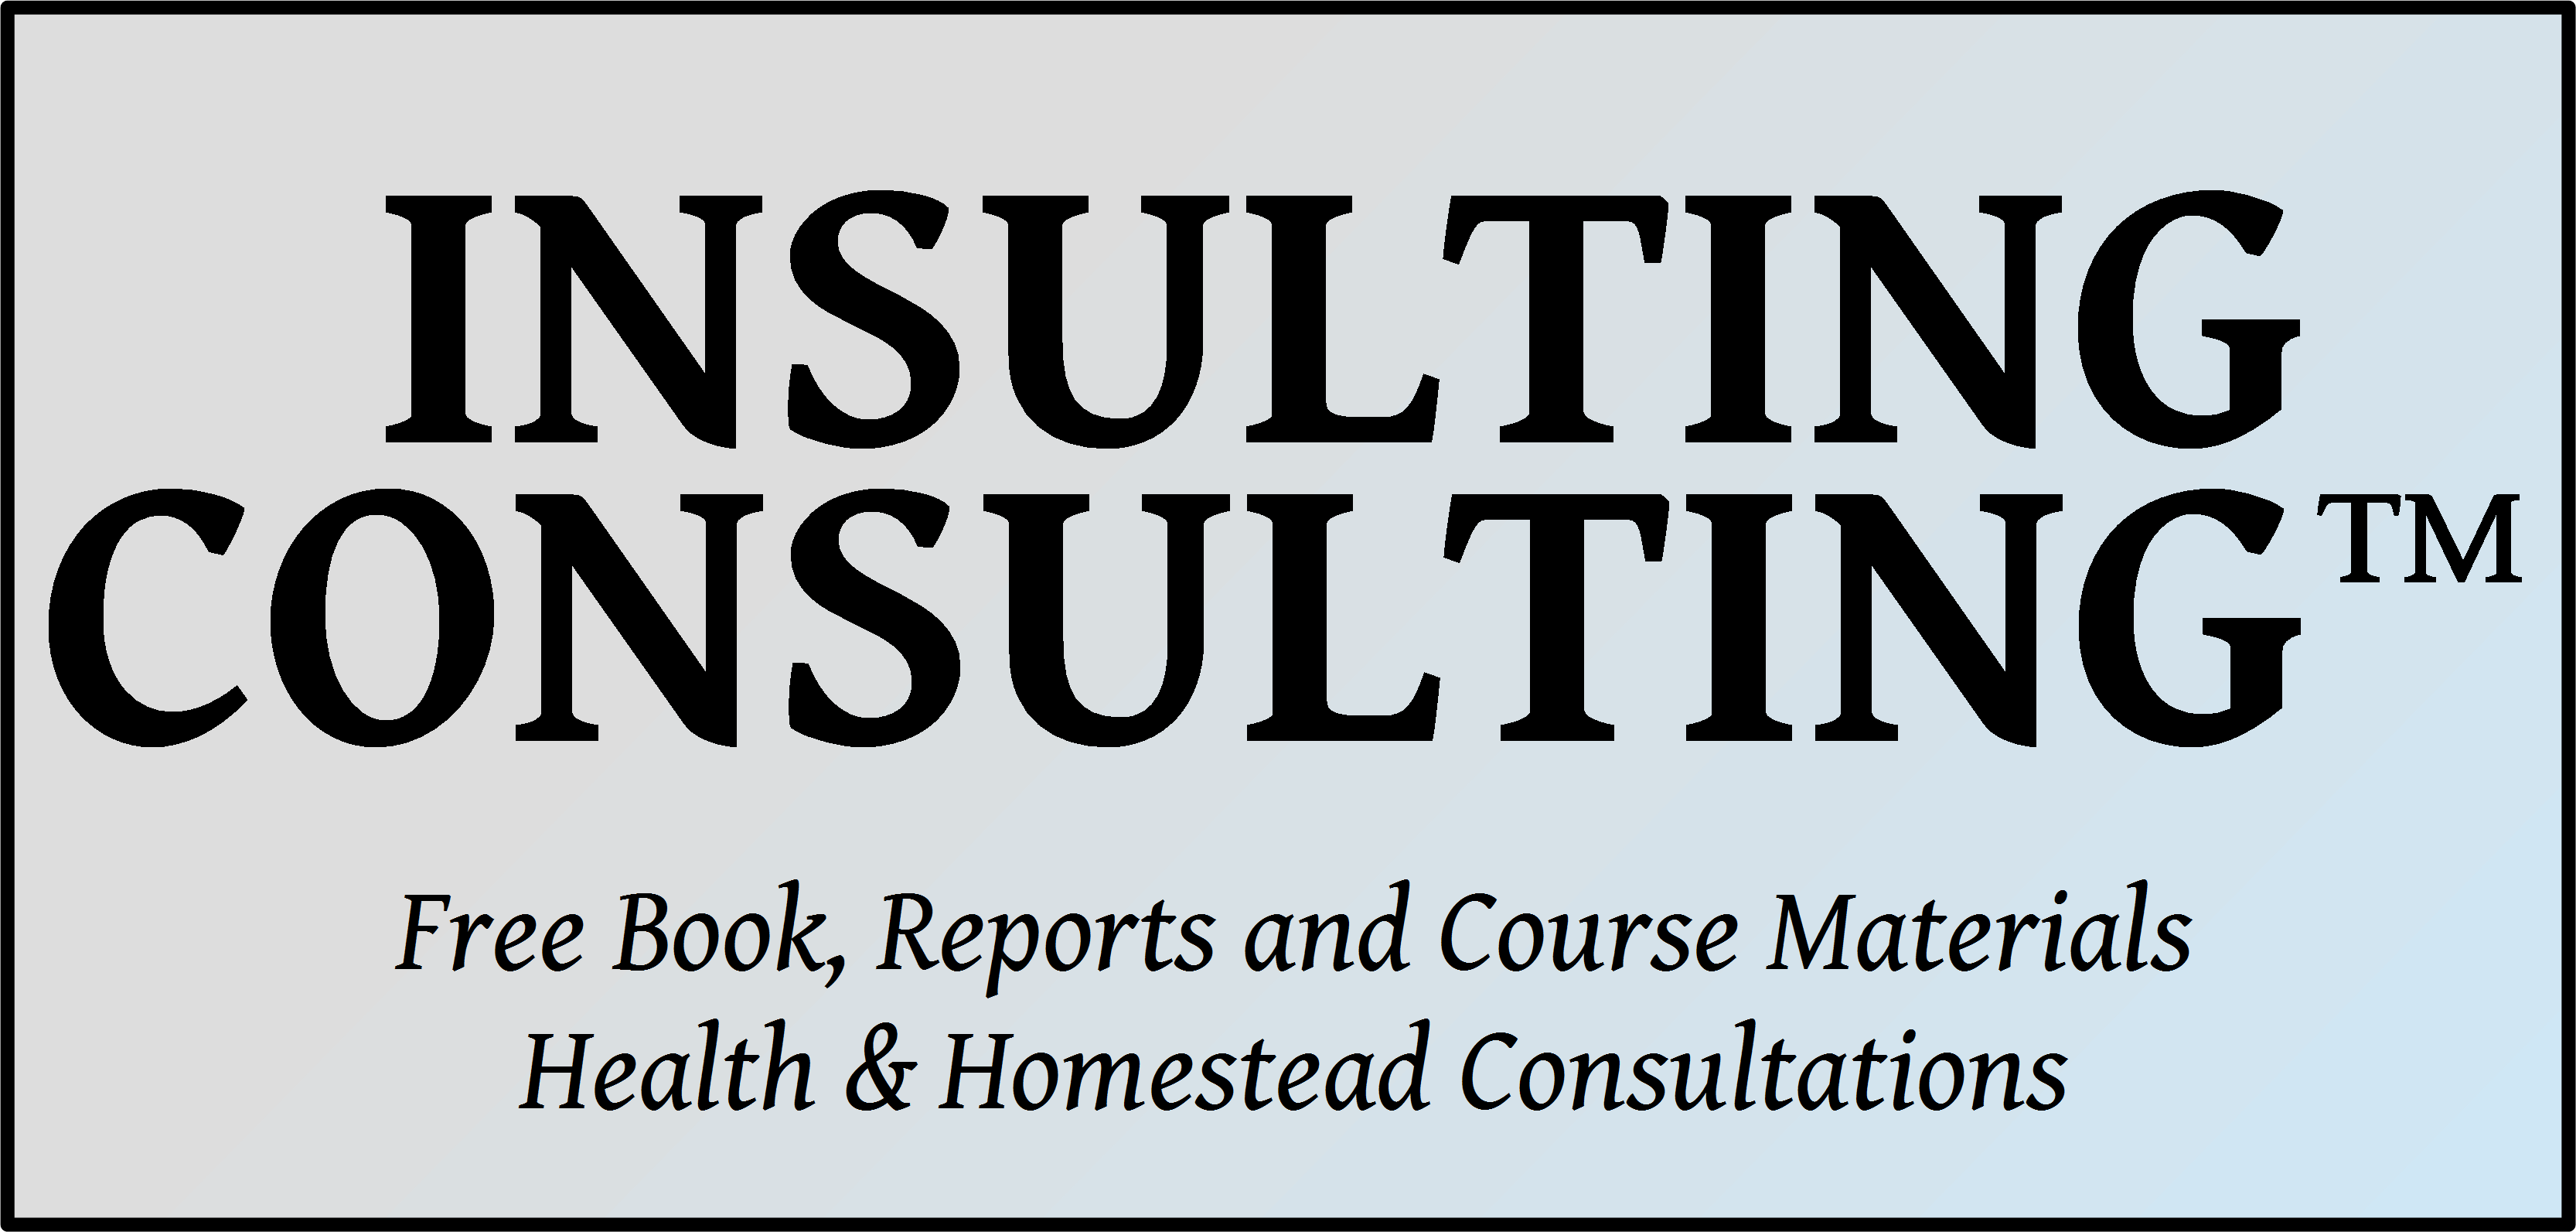 Insulting Consulting | Free Book, Reports and Course Materials; Health and Homestead Consultations